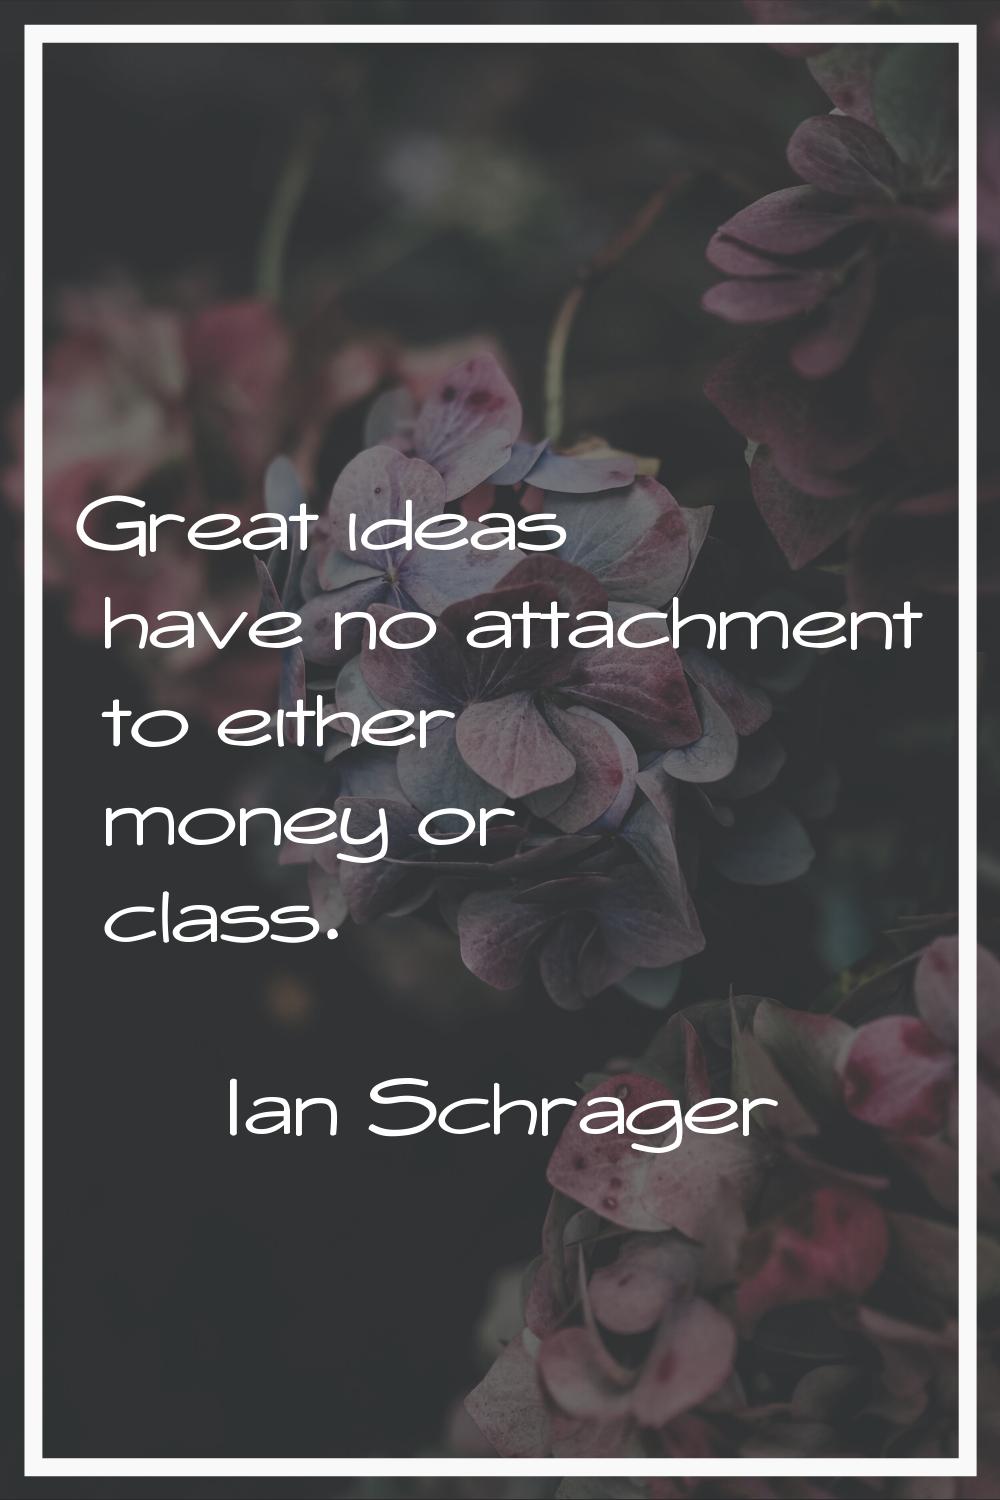 Great ideas have no attachment to either money or class.